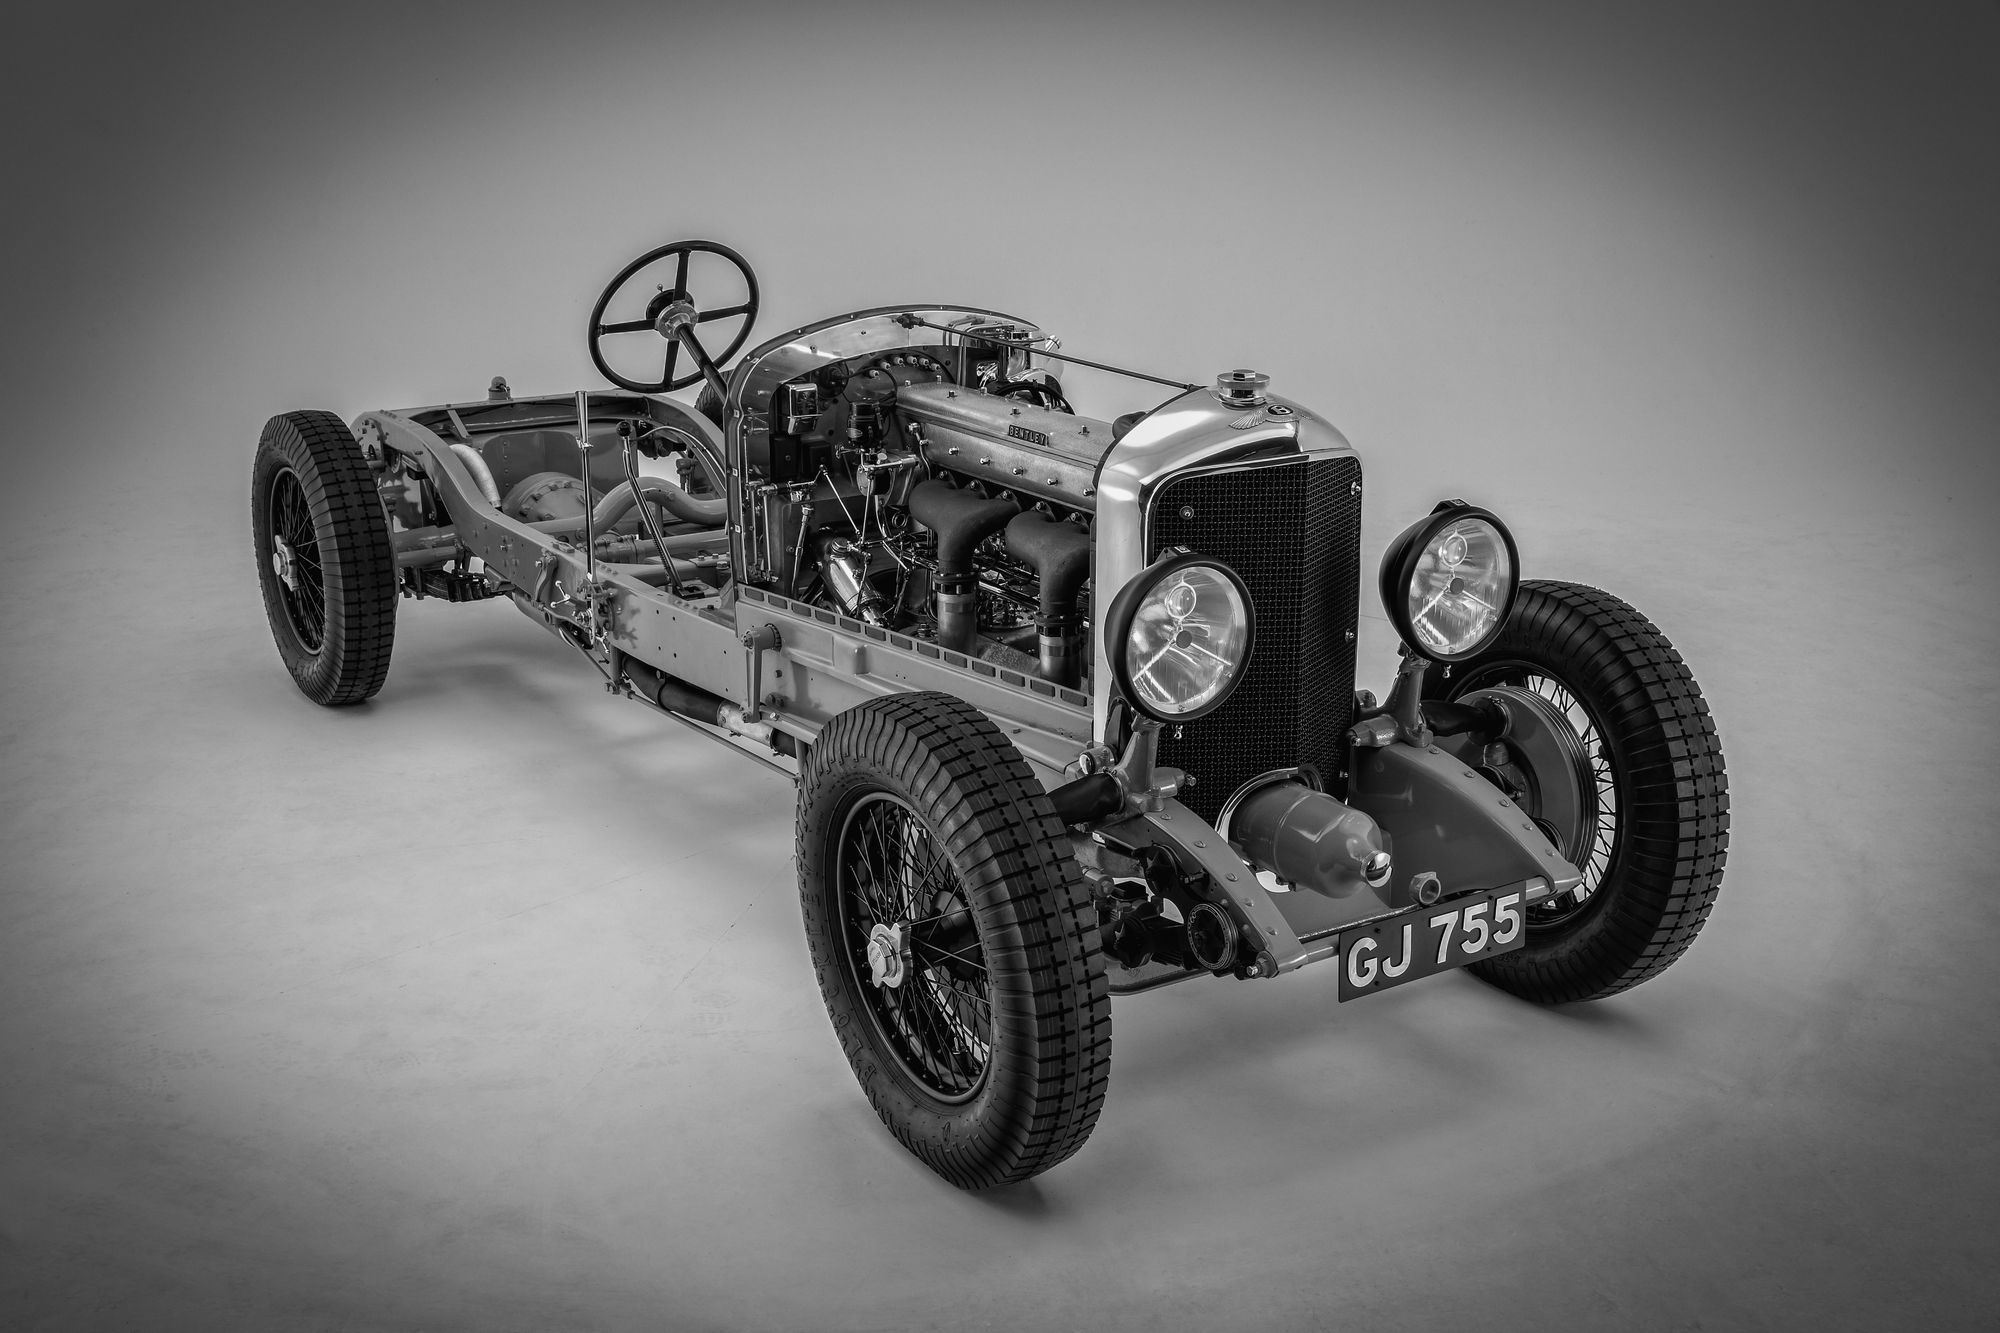 We are set to unveil the legendary Rolling Chassis at Pebble Beach this week!